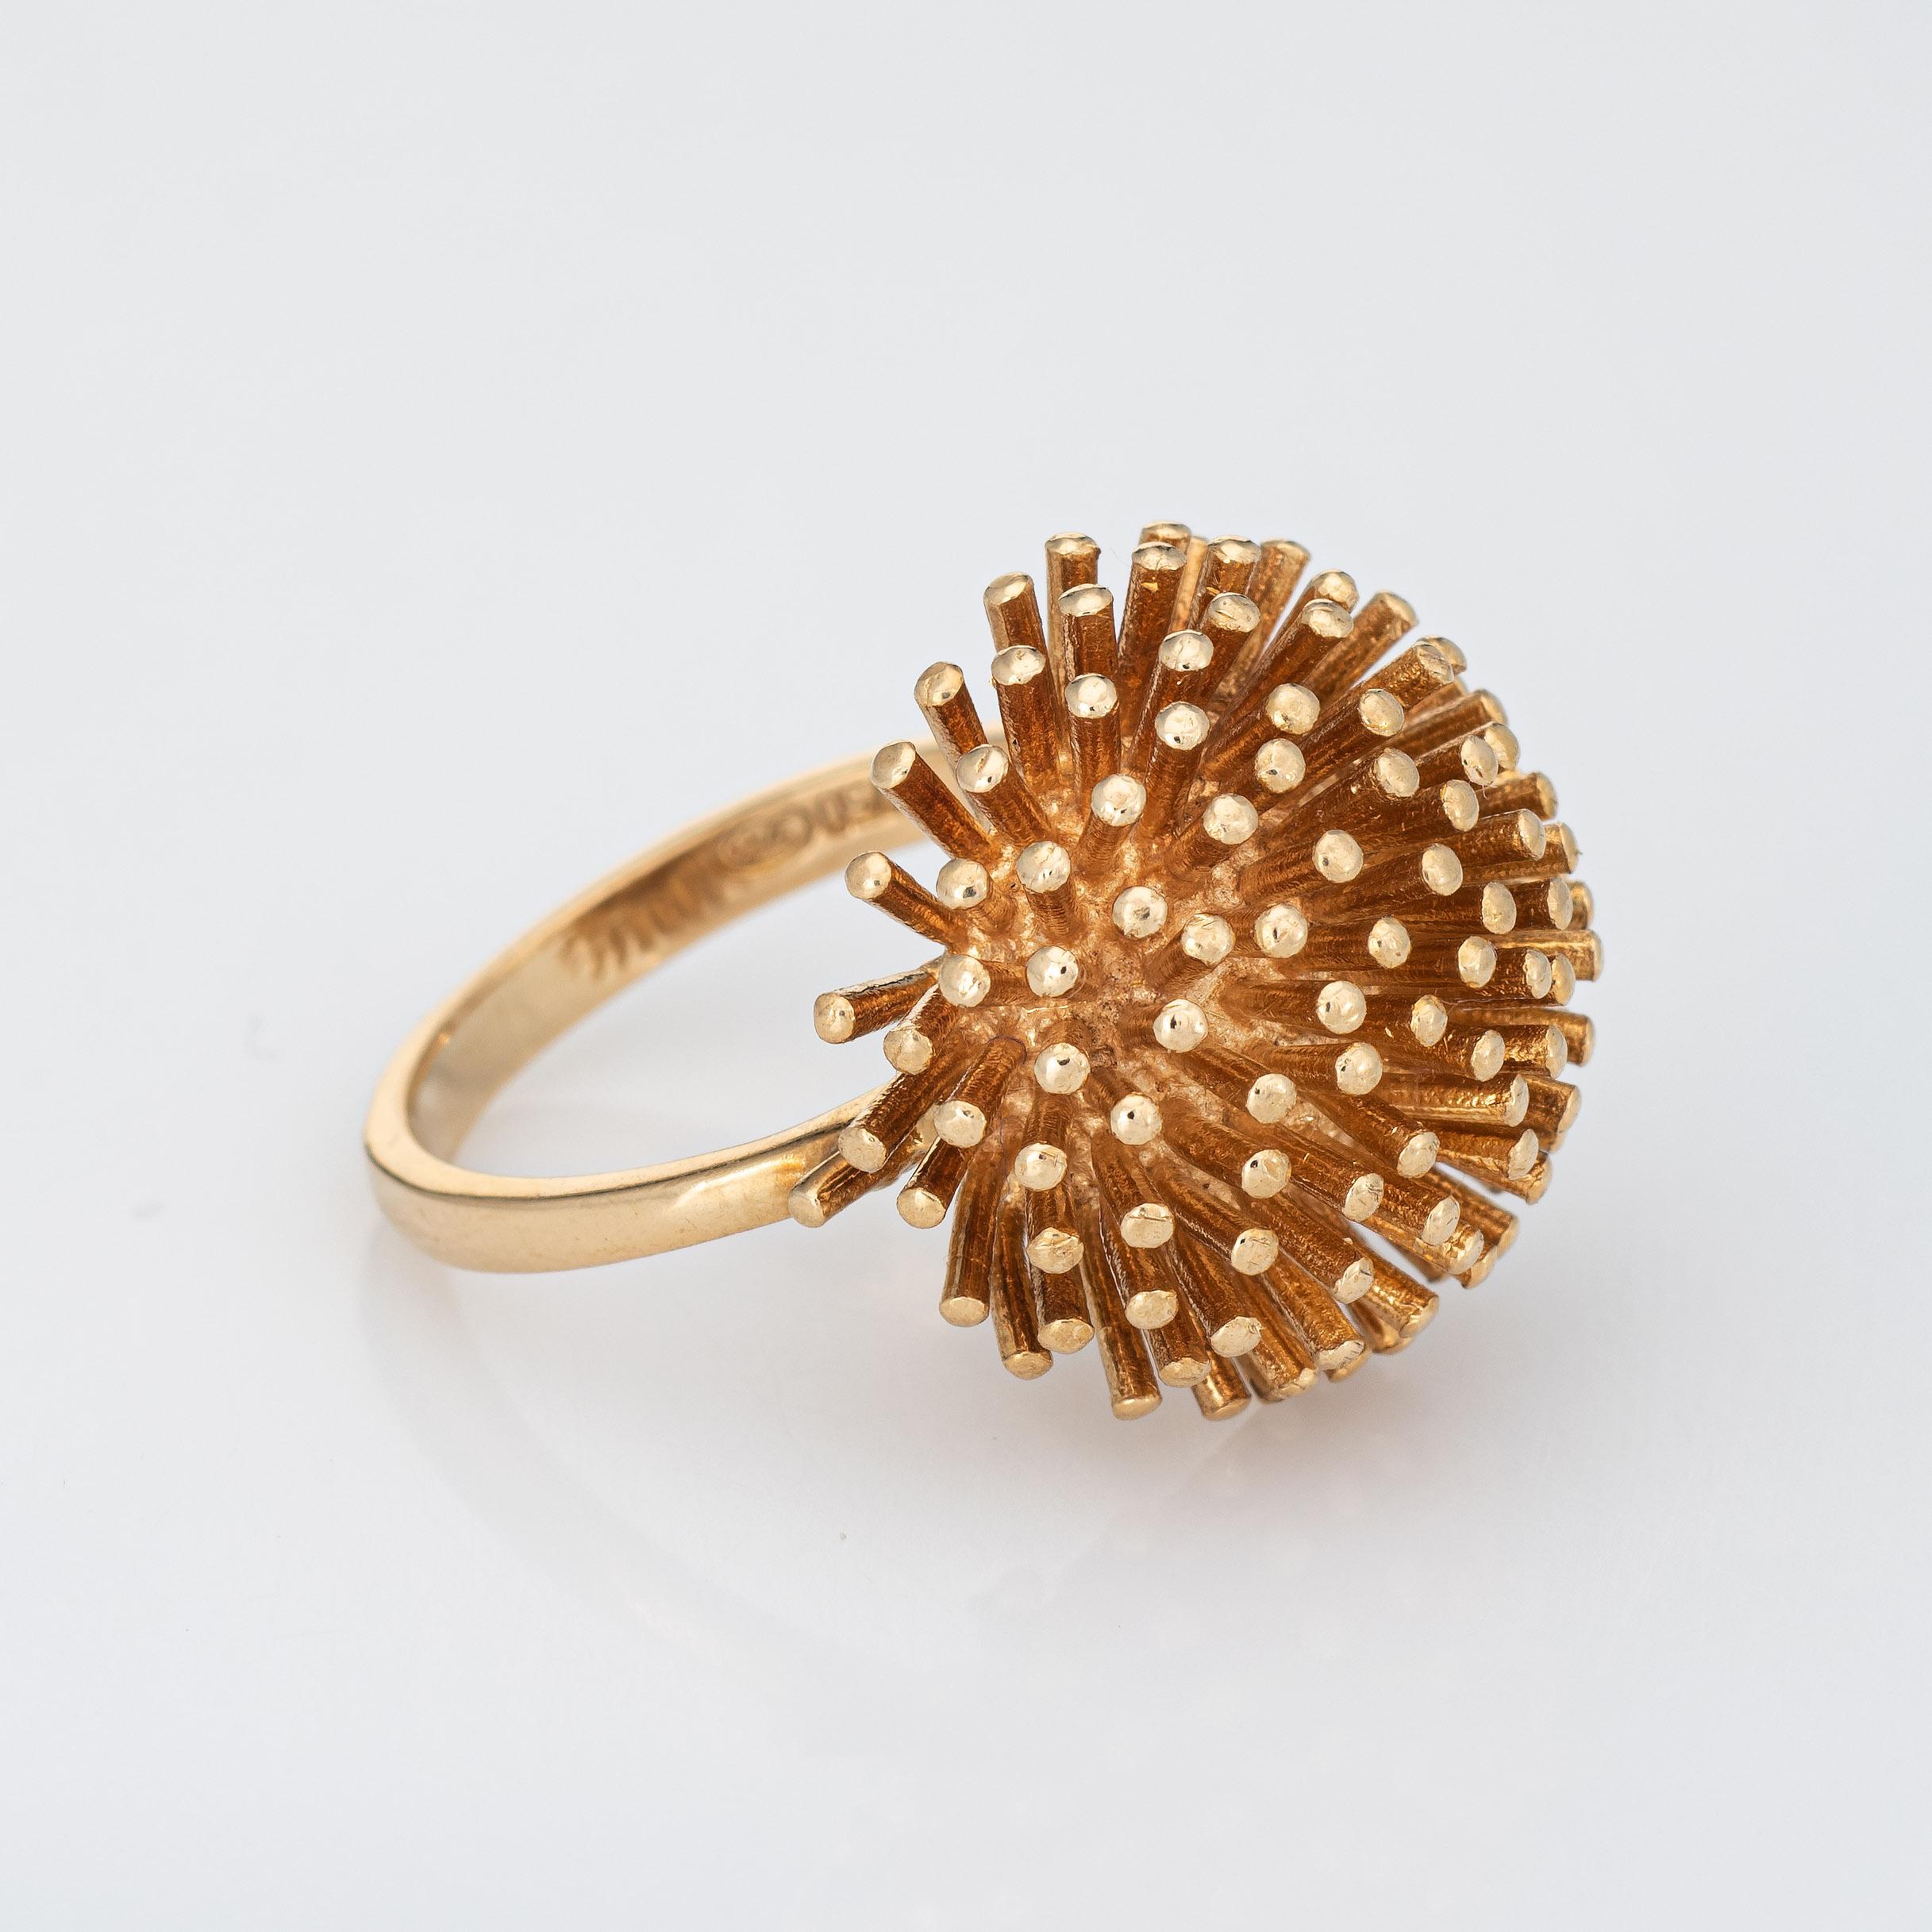 Modern Dandelion Ring Vintage 18k Yellow Gold Round Dome Estate Cocktail Jewelry